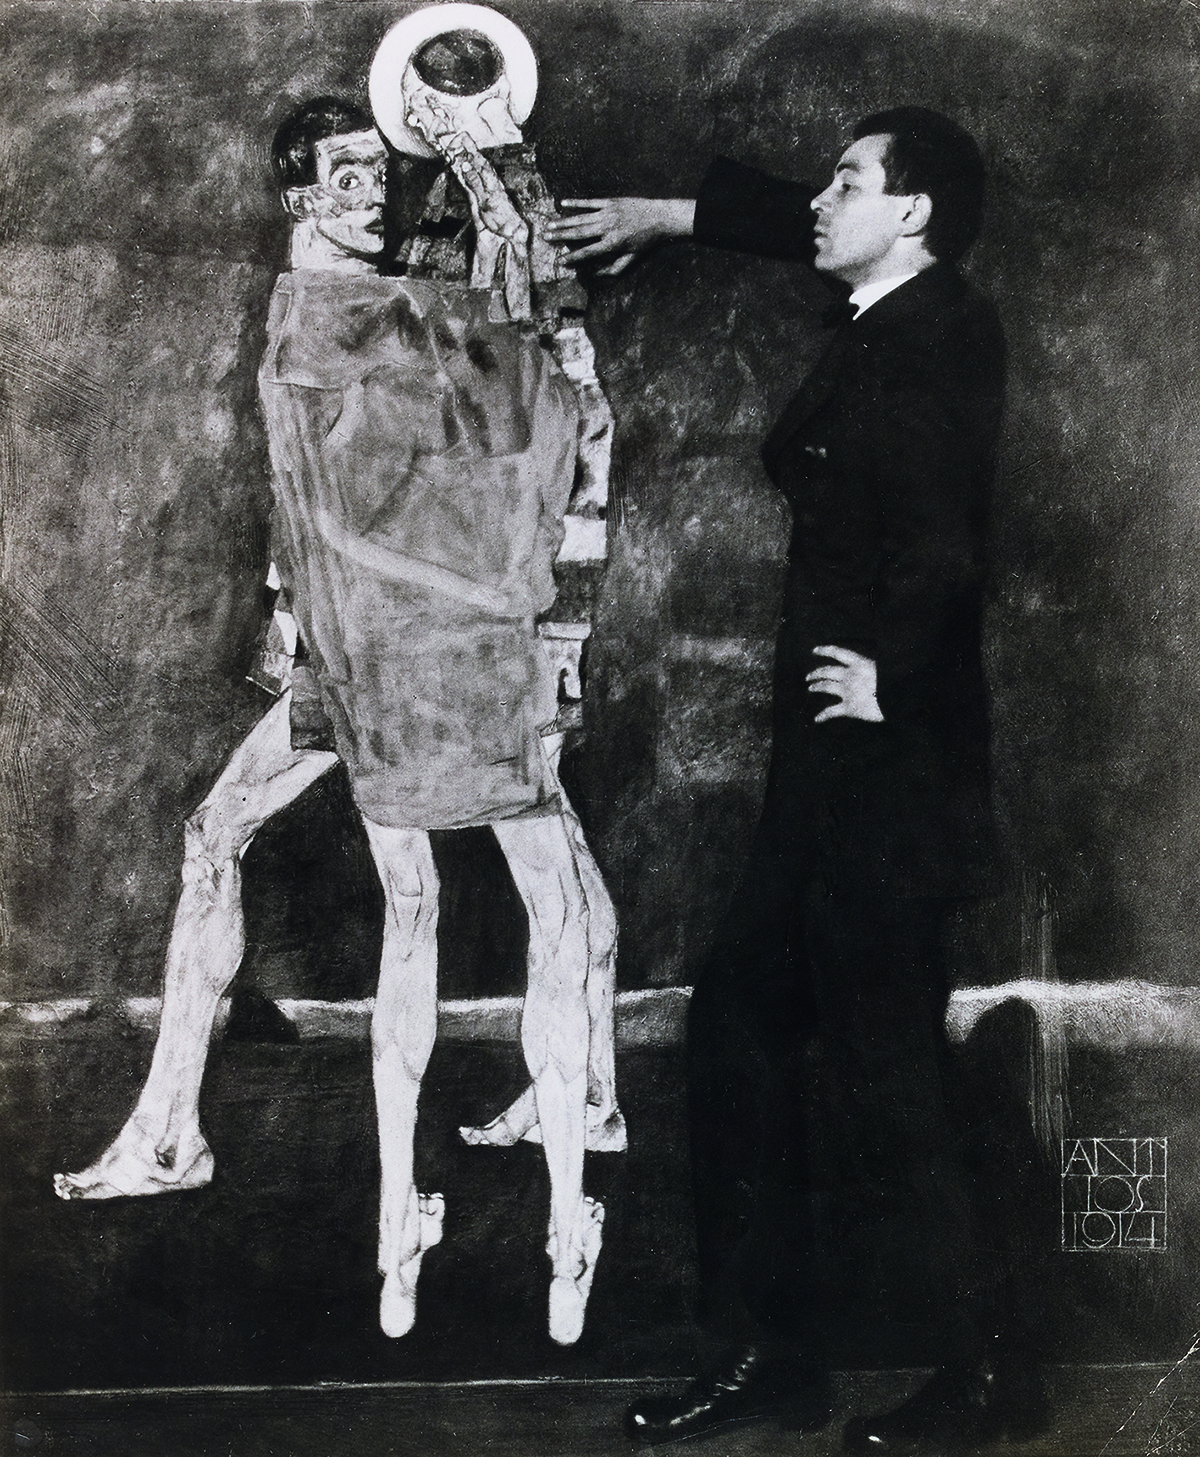 Black and white photograph of Egon Schiele with one of his paintings